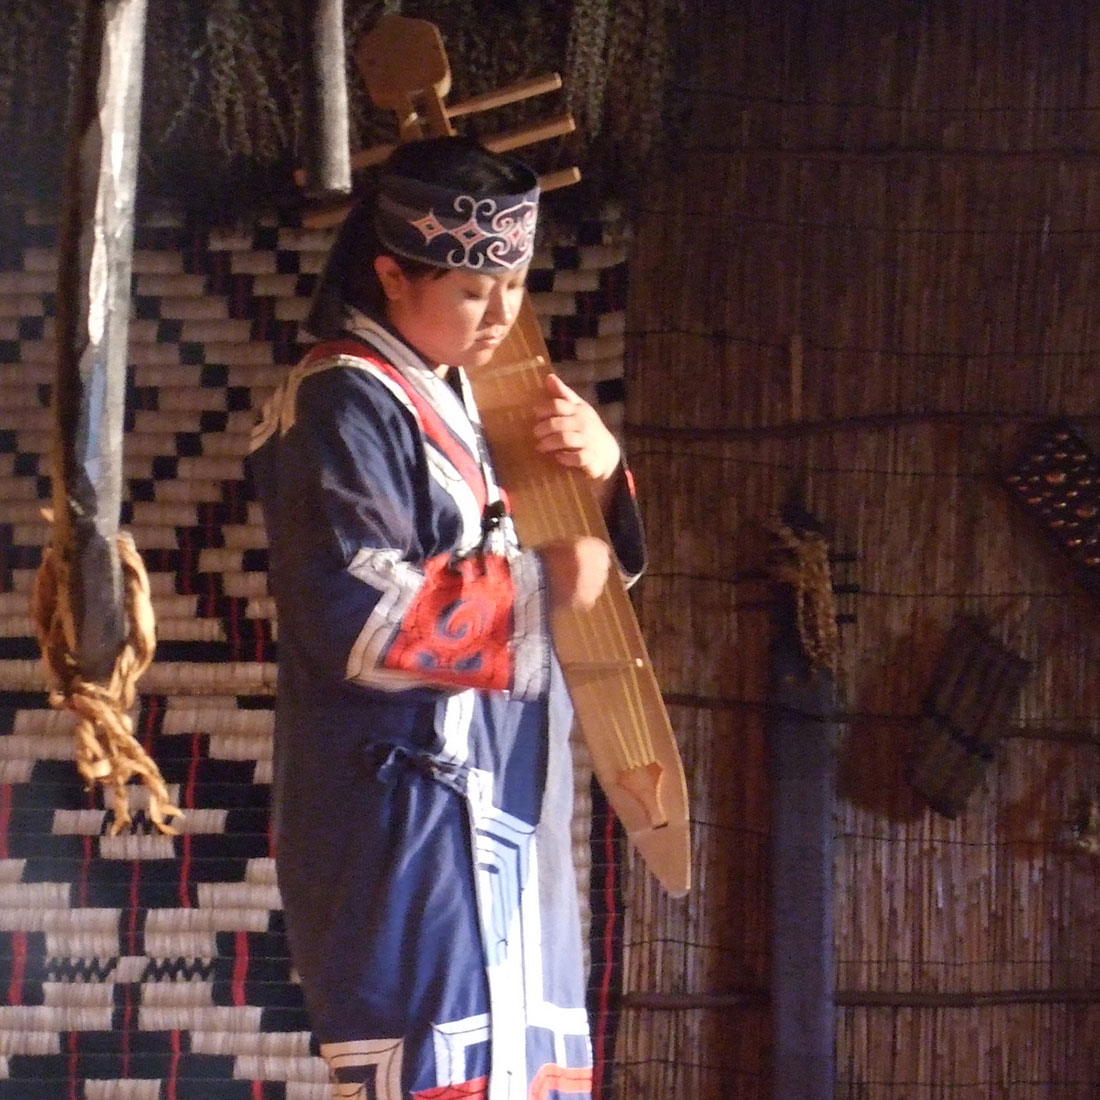 An Ainu woman playing a large wooden instrument.